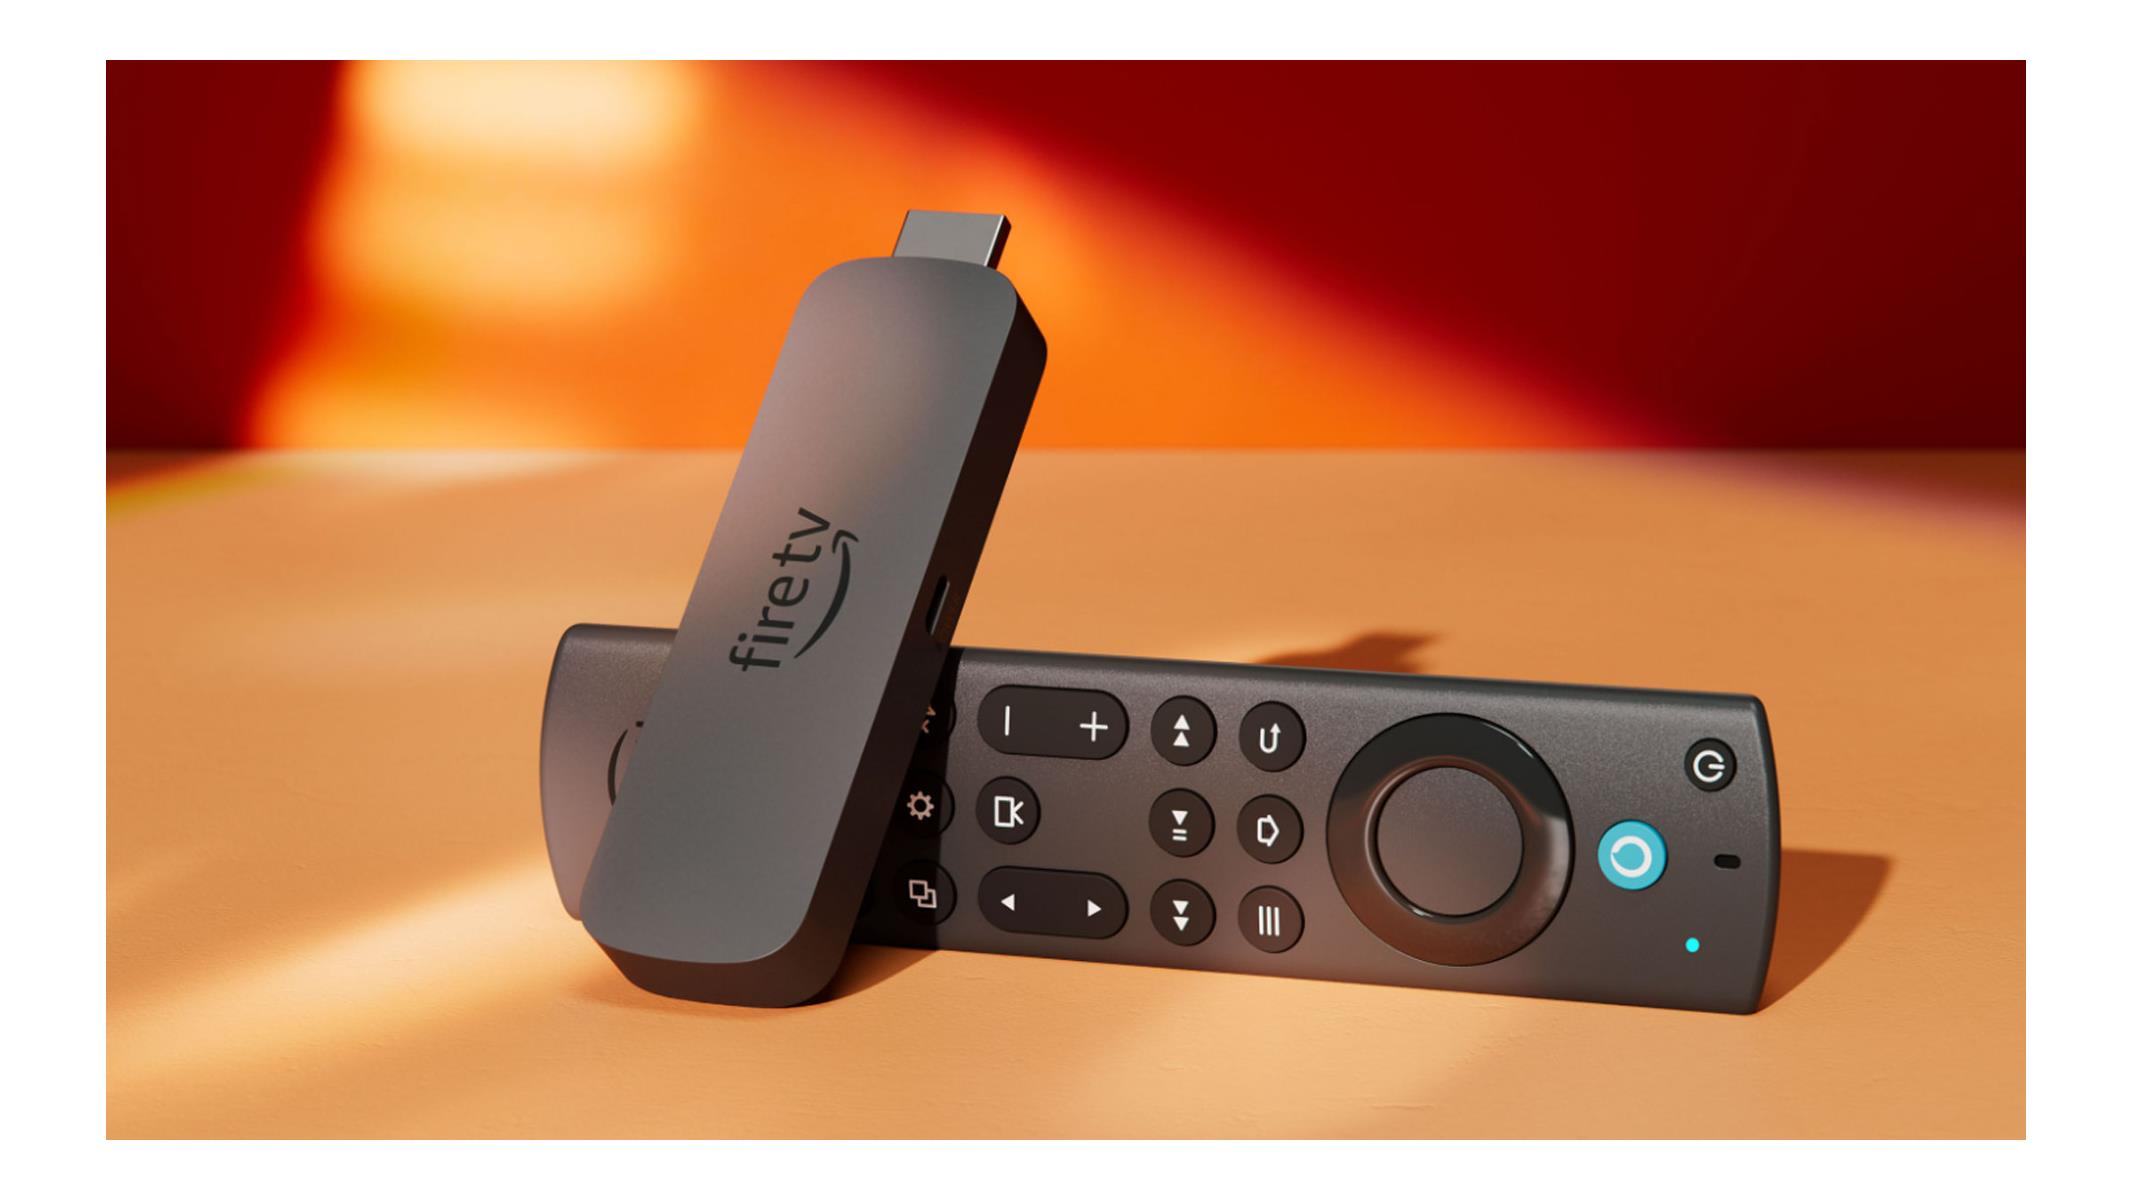 Fire TV Stick 4K review: hold the remote - The Verge